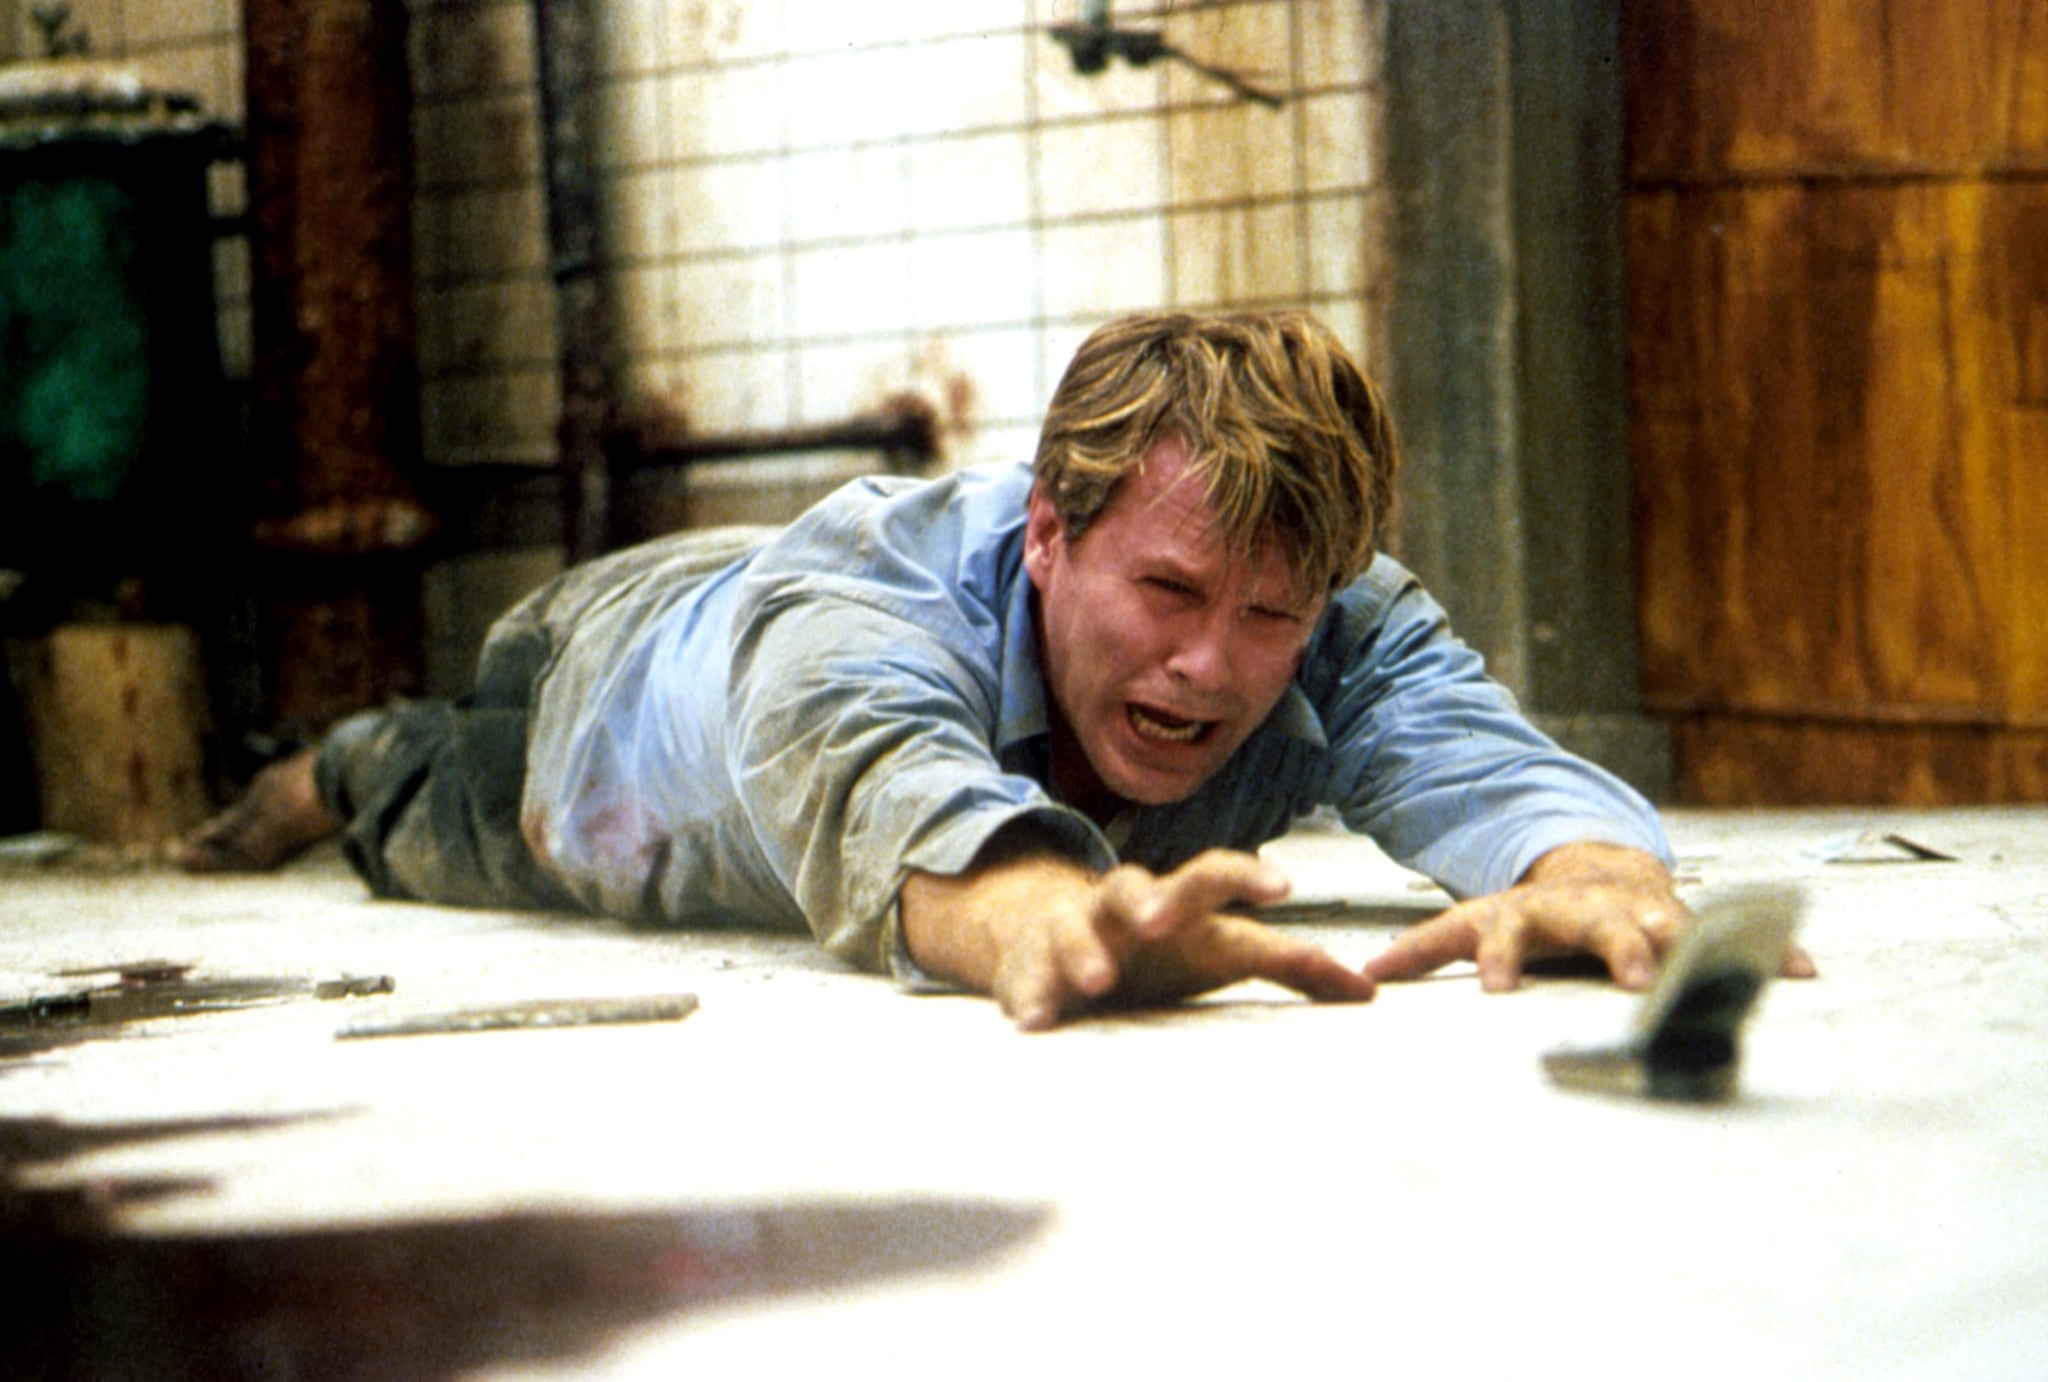 Cary Elwes, rumpled and covered in filth, lies on a dirty basement floor and weeps as he tries to grab a cell phone lying on the floor just out of reach in the original 2004 Saw